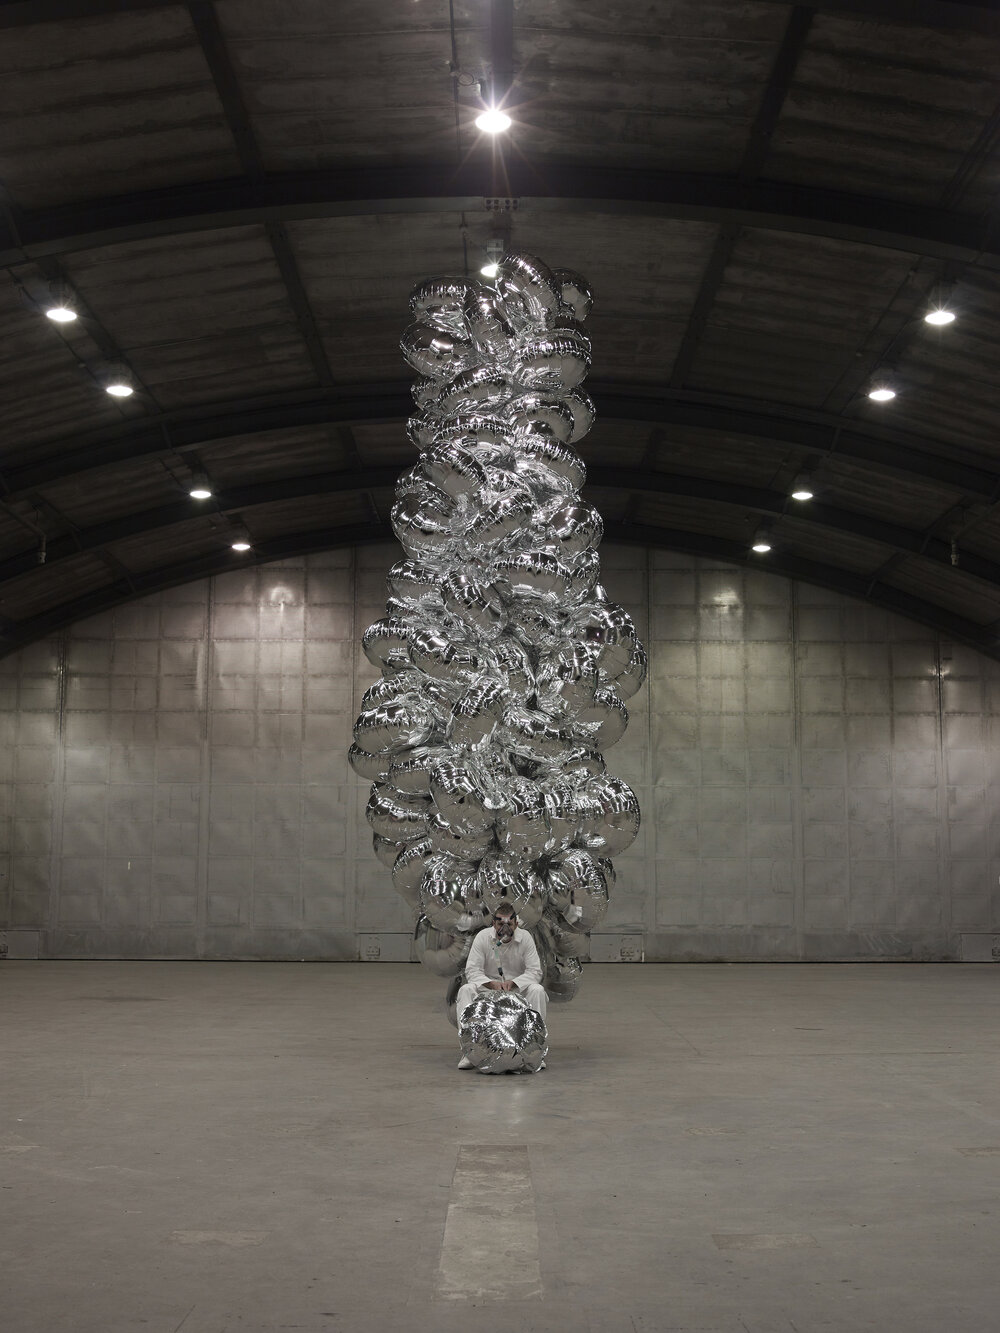 Exhaust (2011) 24 hours of exhaled air and foil balloons. Image credit: Manuel Vason